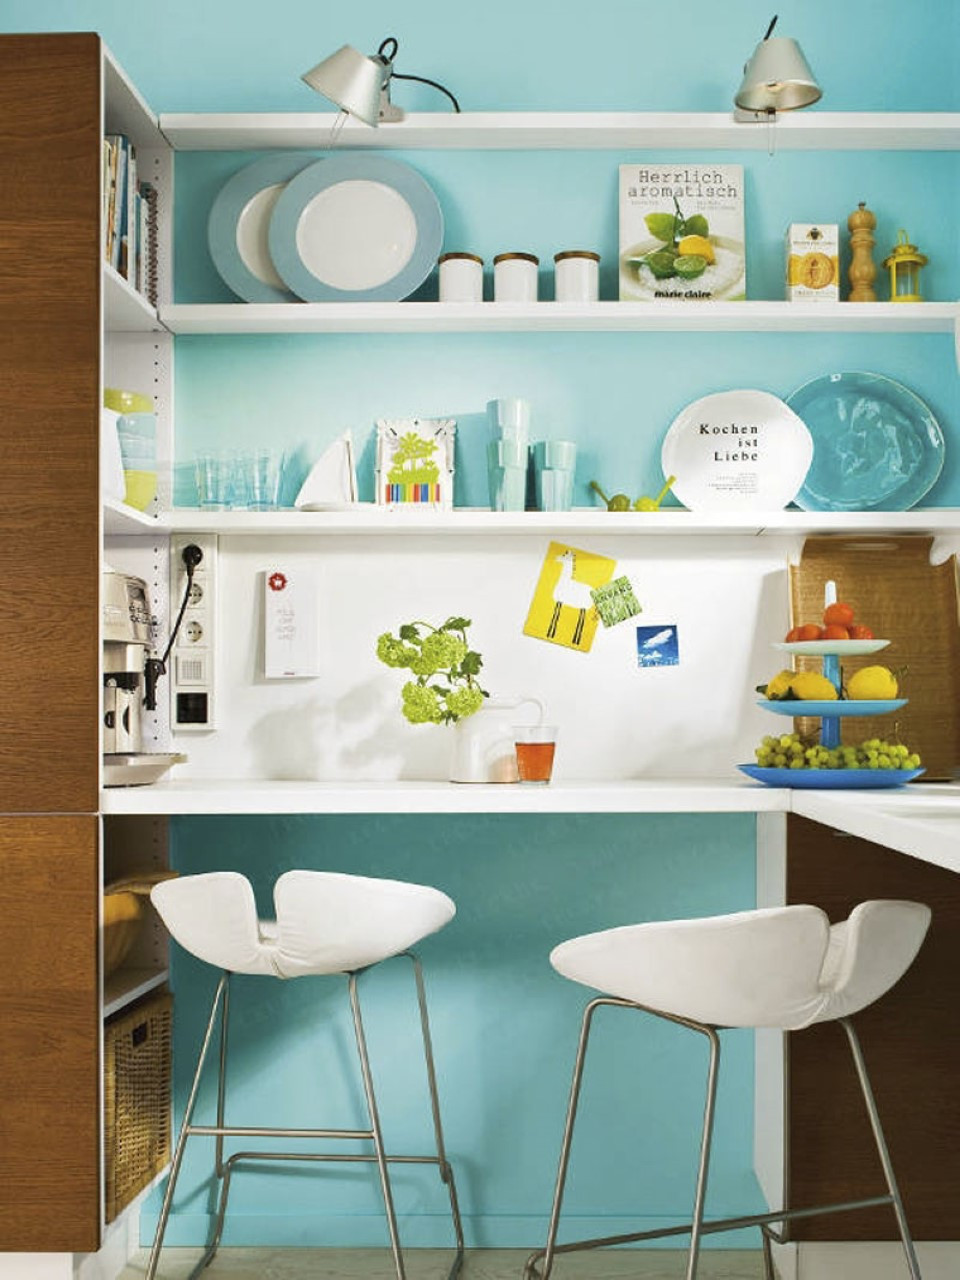 Blue Kitchen Wall Decor
 2015 Kitchen Ideas with Fascinating Wall Treatment